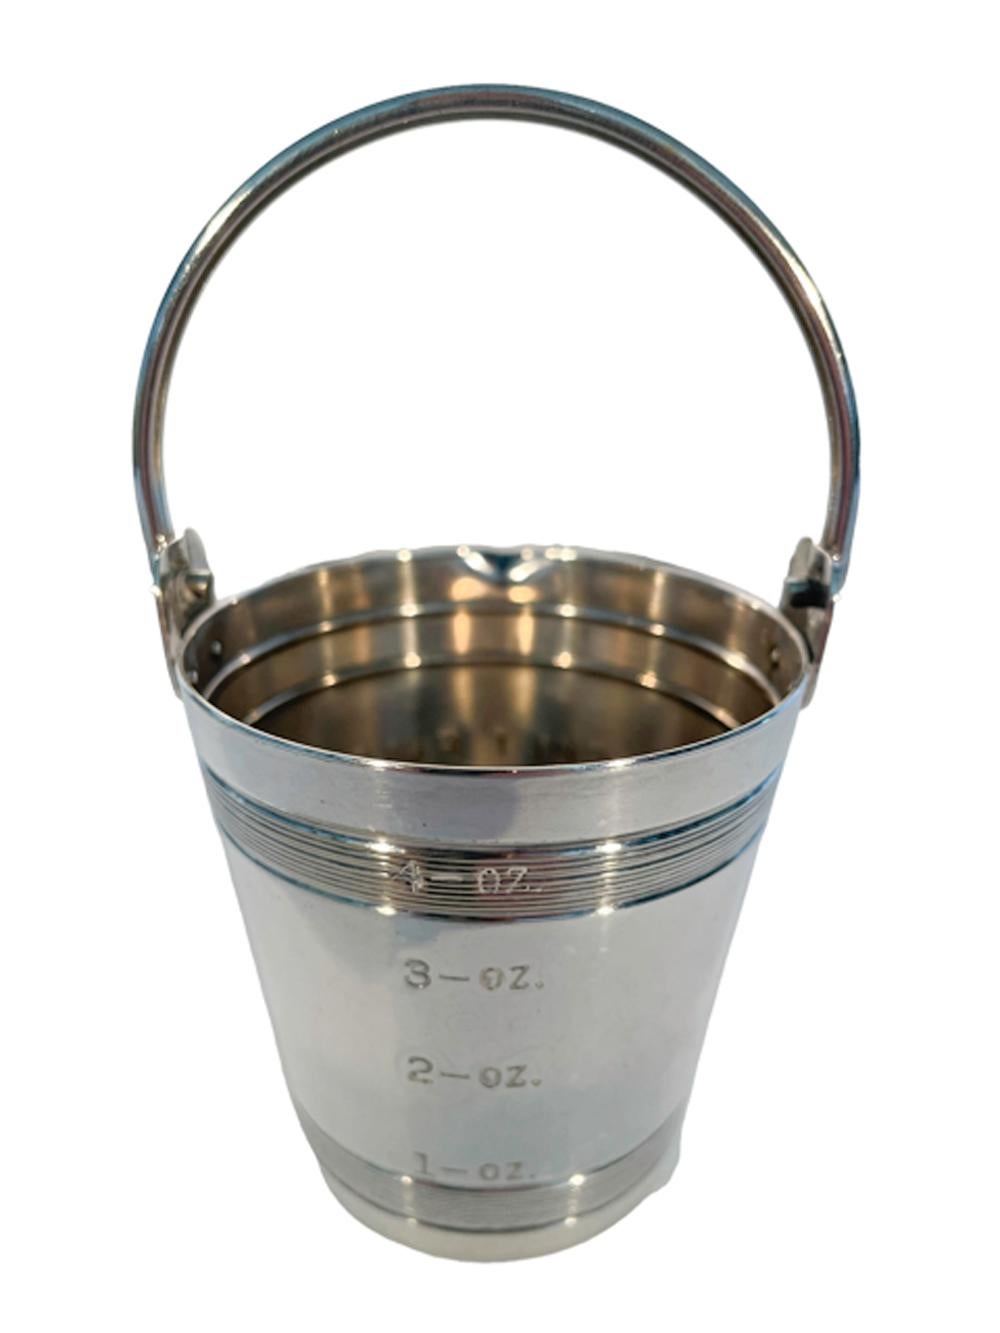 Art Deco 4 once silver plate spirit measure by Napier in the form of a pail with bail handle and raised ring and engin turned bands, calibrated on the back 1oz through 4oz and engraved 